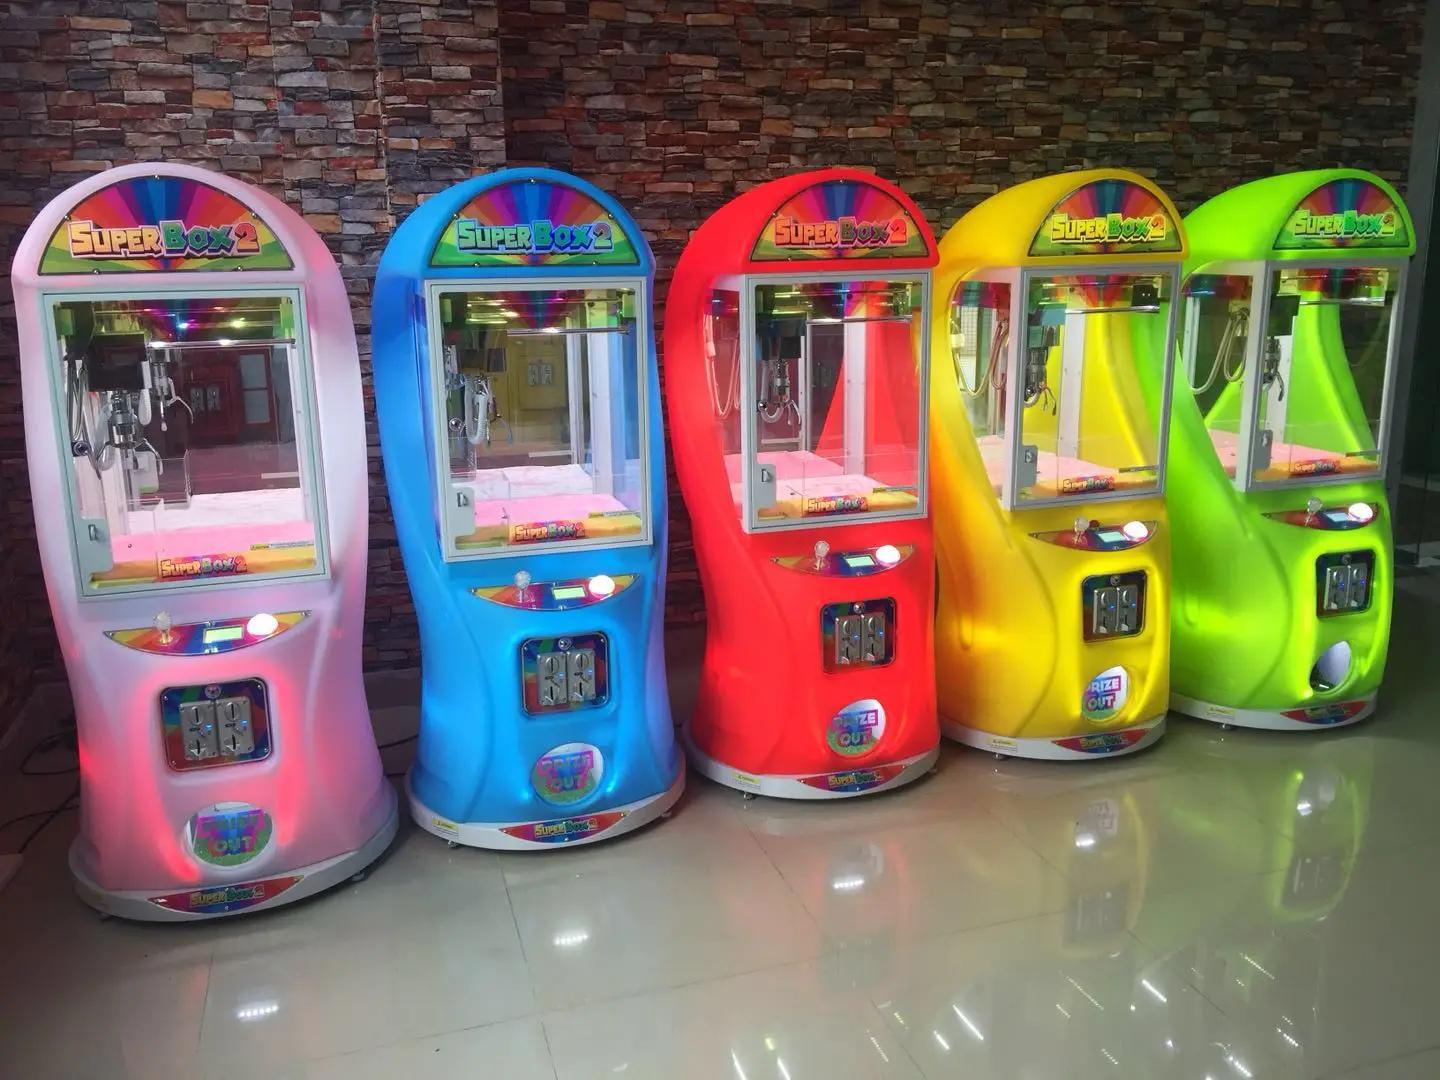 Toys Magic Coin Operated Japan Police Malaysia Gift Doll Cheap Catcher Crazy Bus Toy Vending Mini Cube Star Crane Claw Machine Buy Star Crane Claw Machine Mini Cube Claw Machine Toy Vending Machine